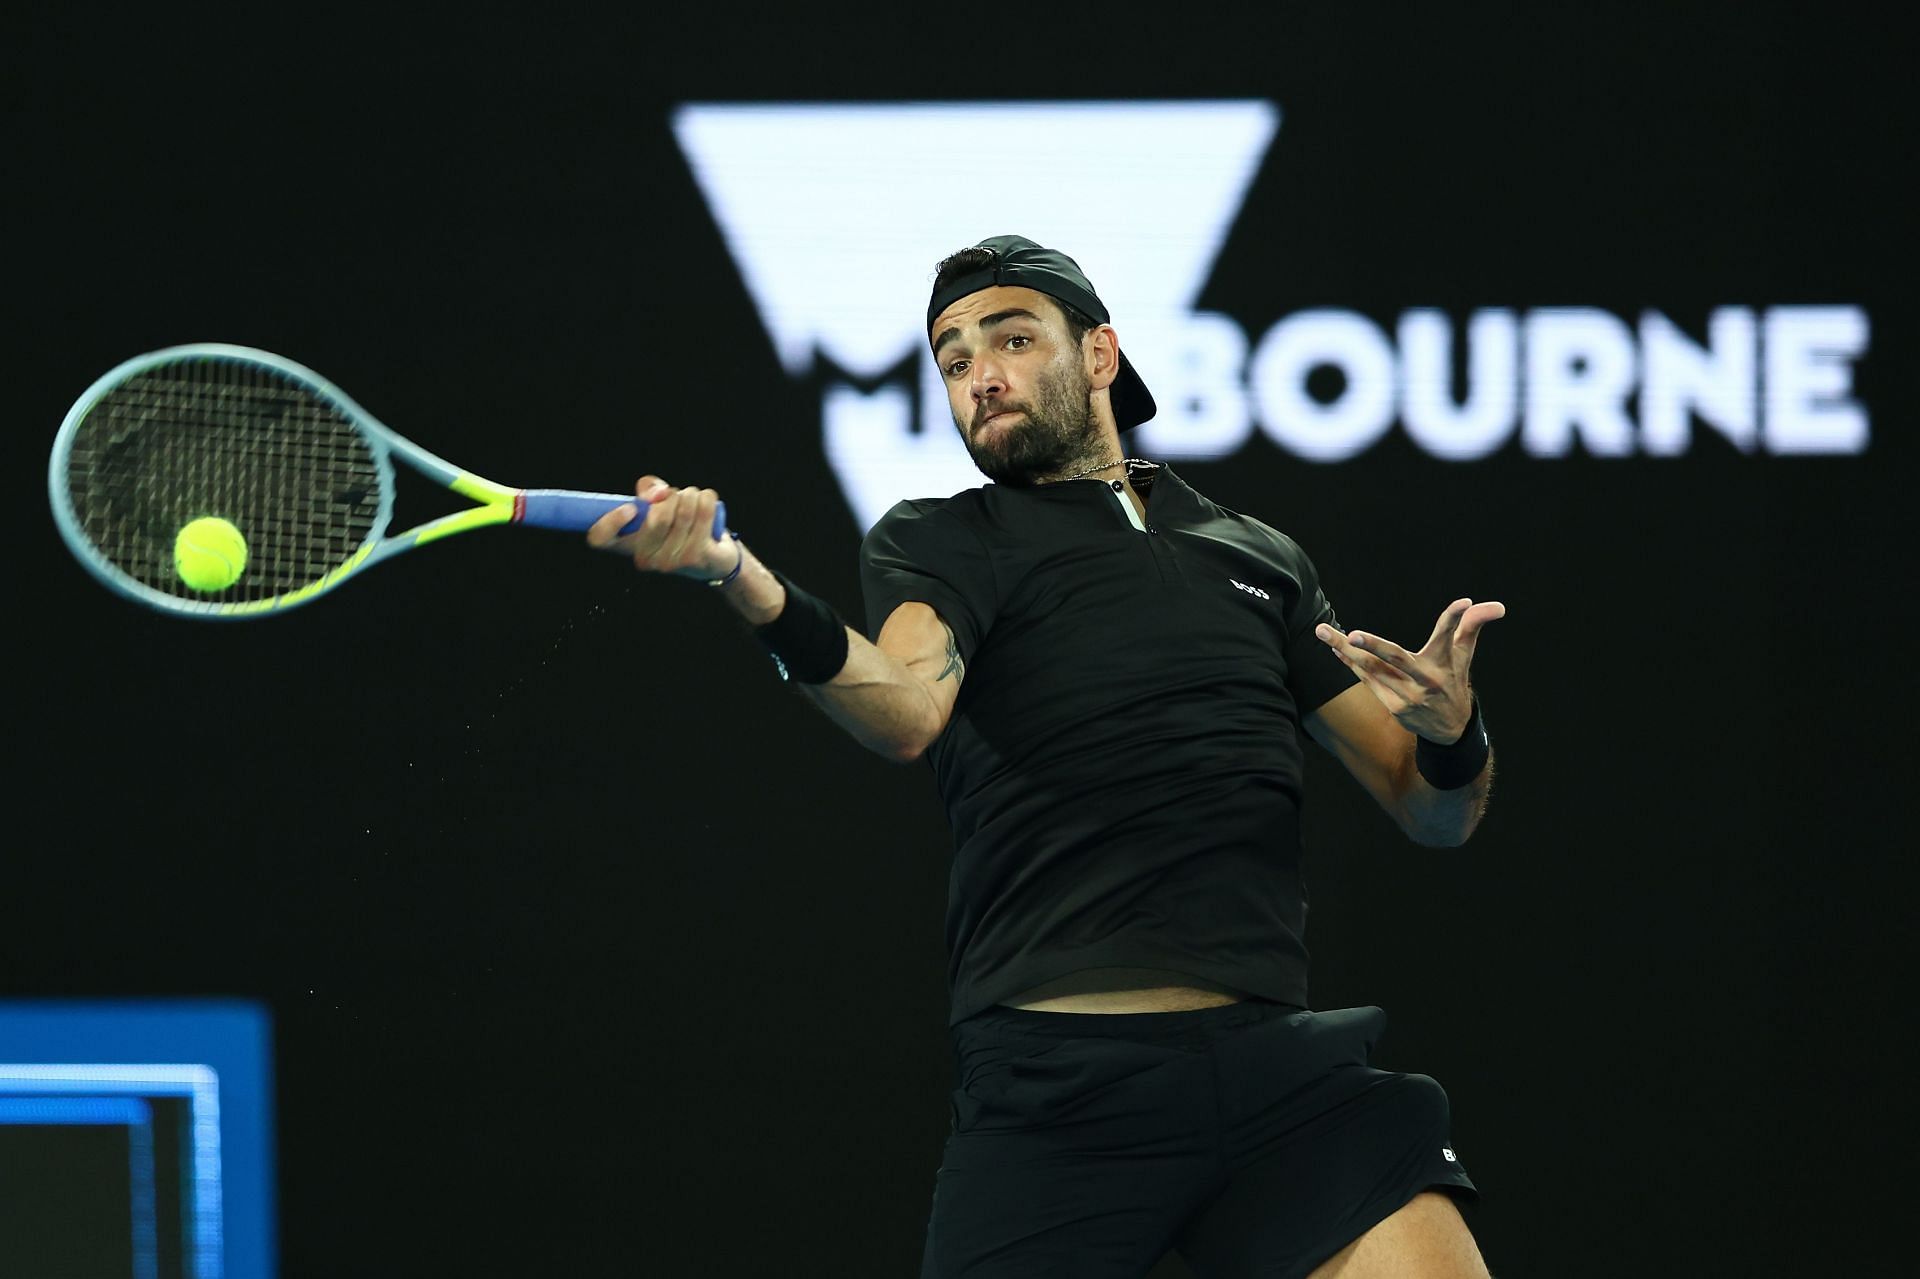 Berrettini is the first Italian to reach the semifinals of the Australian Open